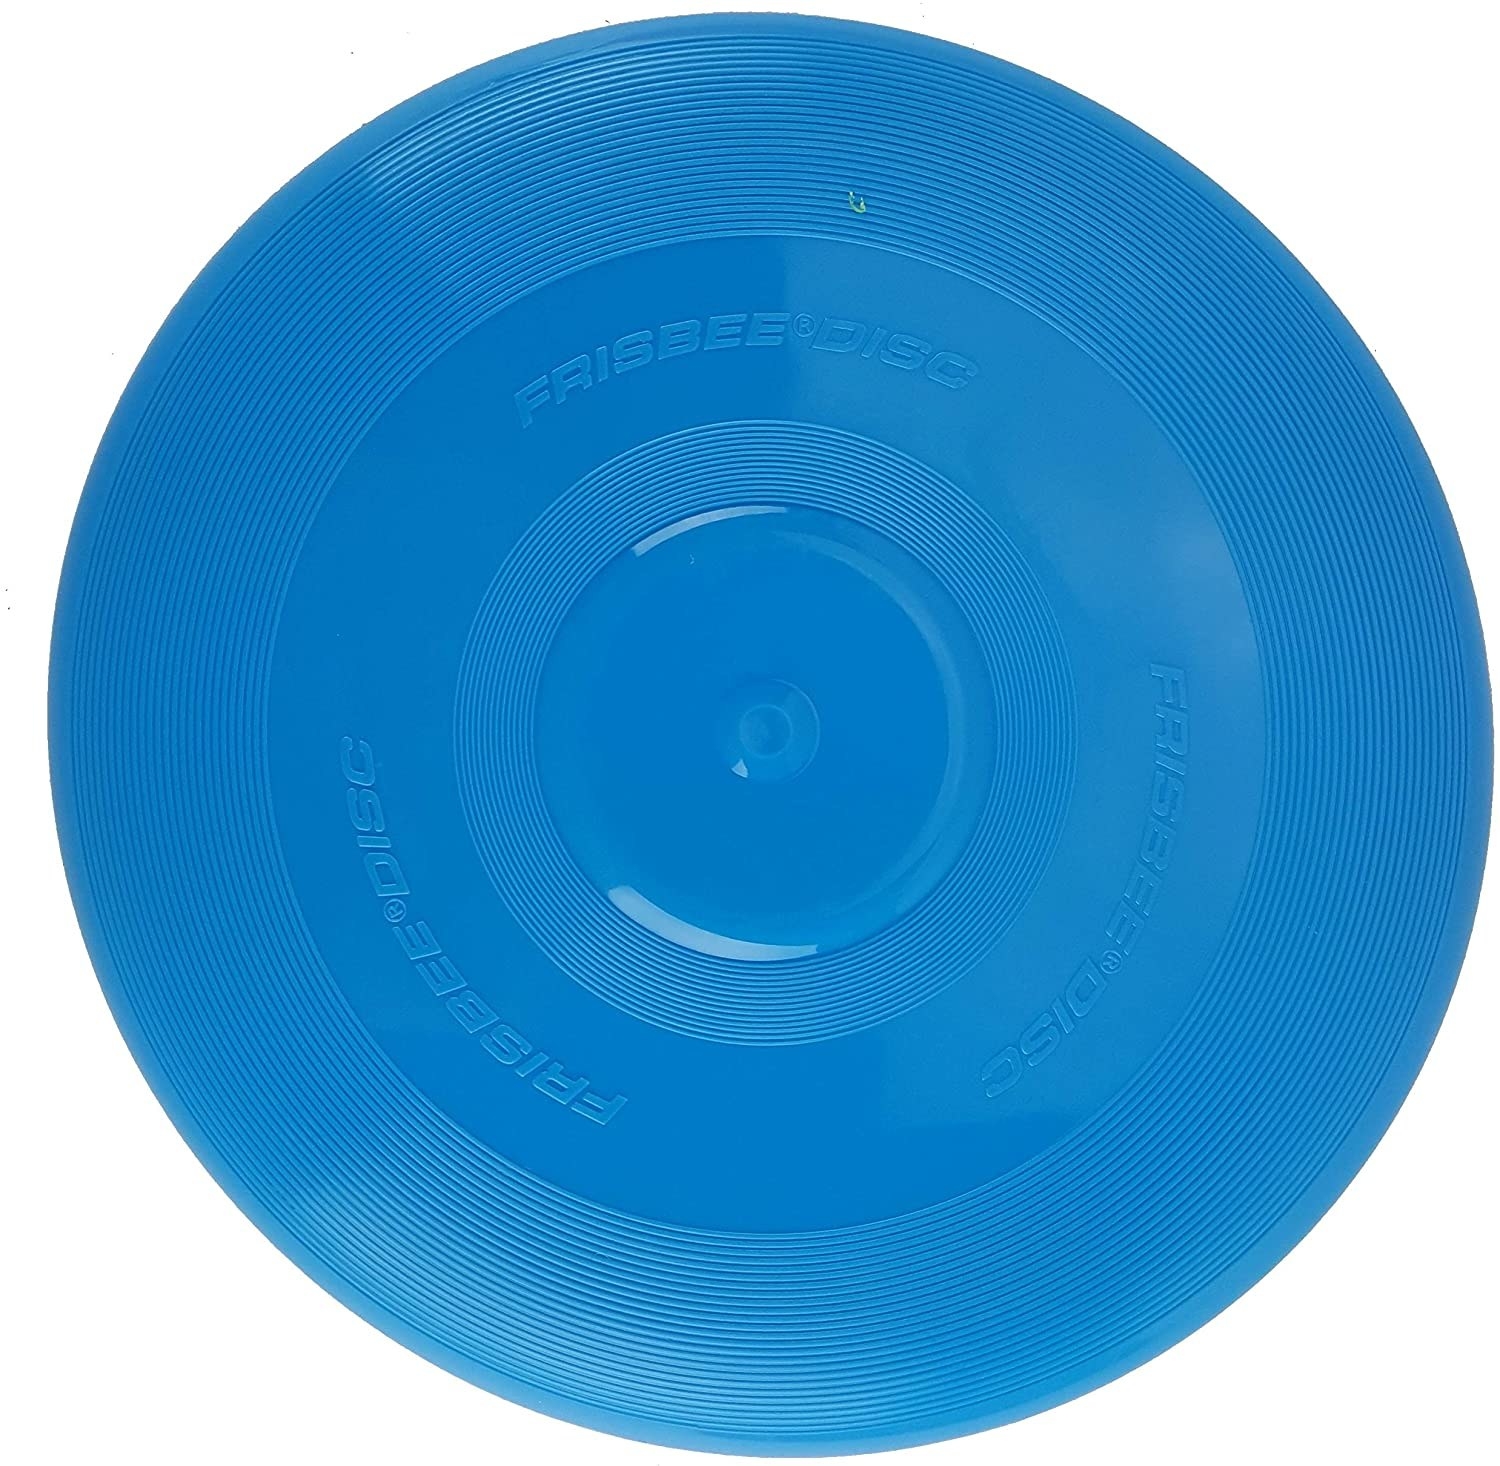 The frisbee